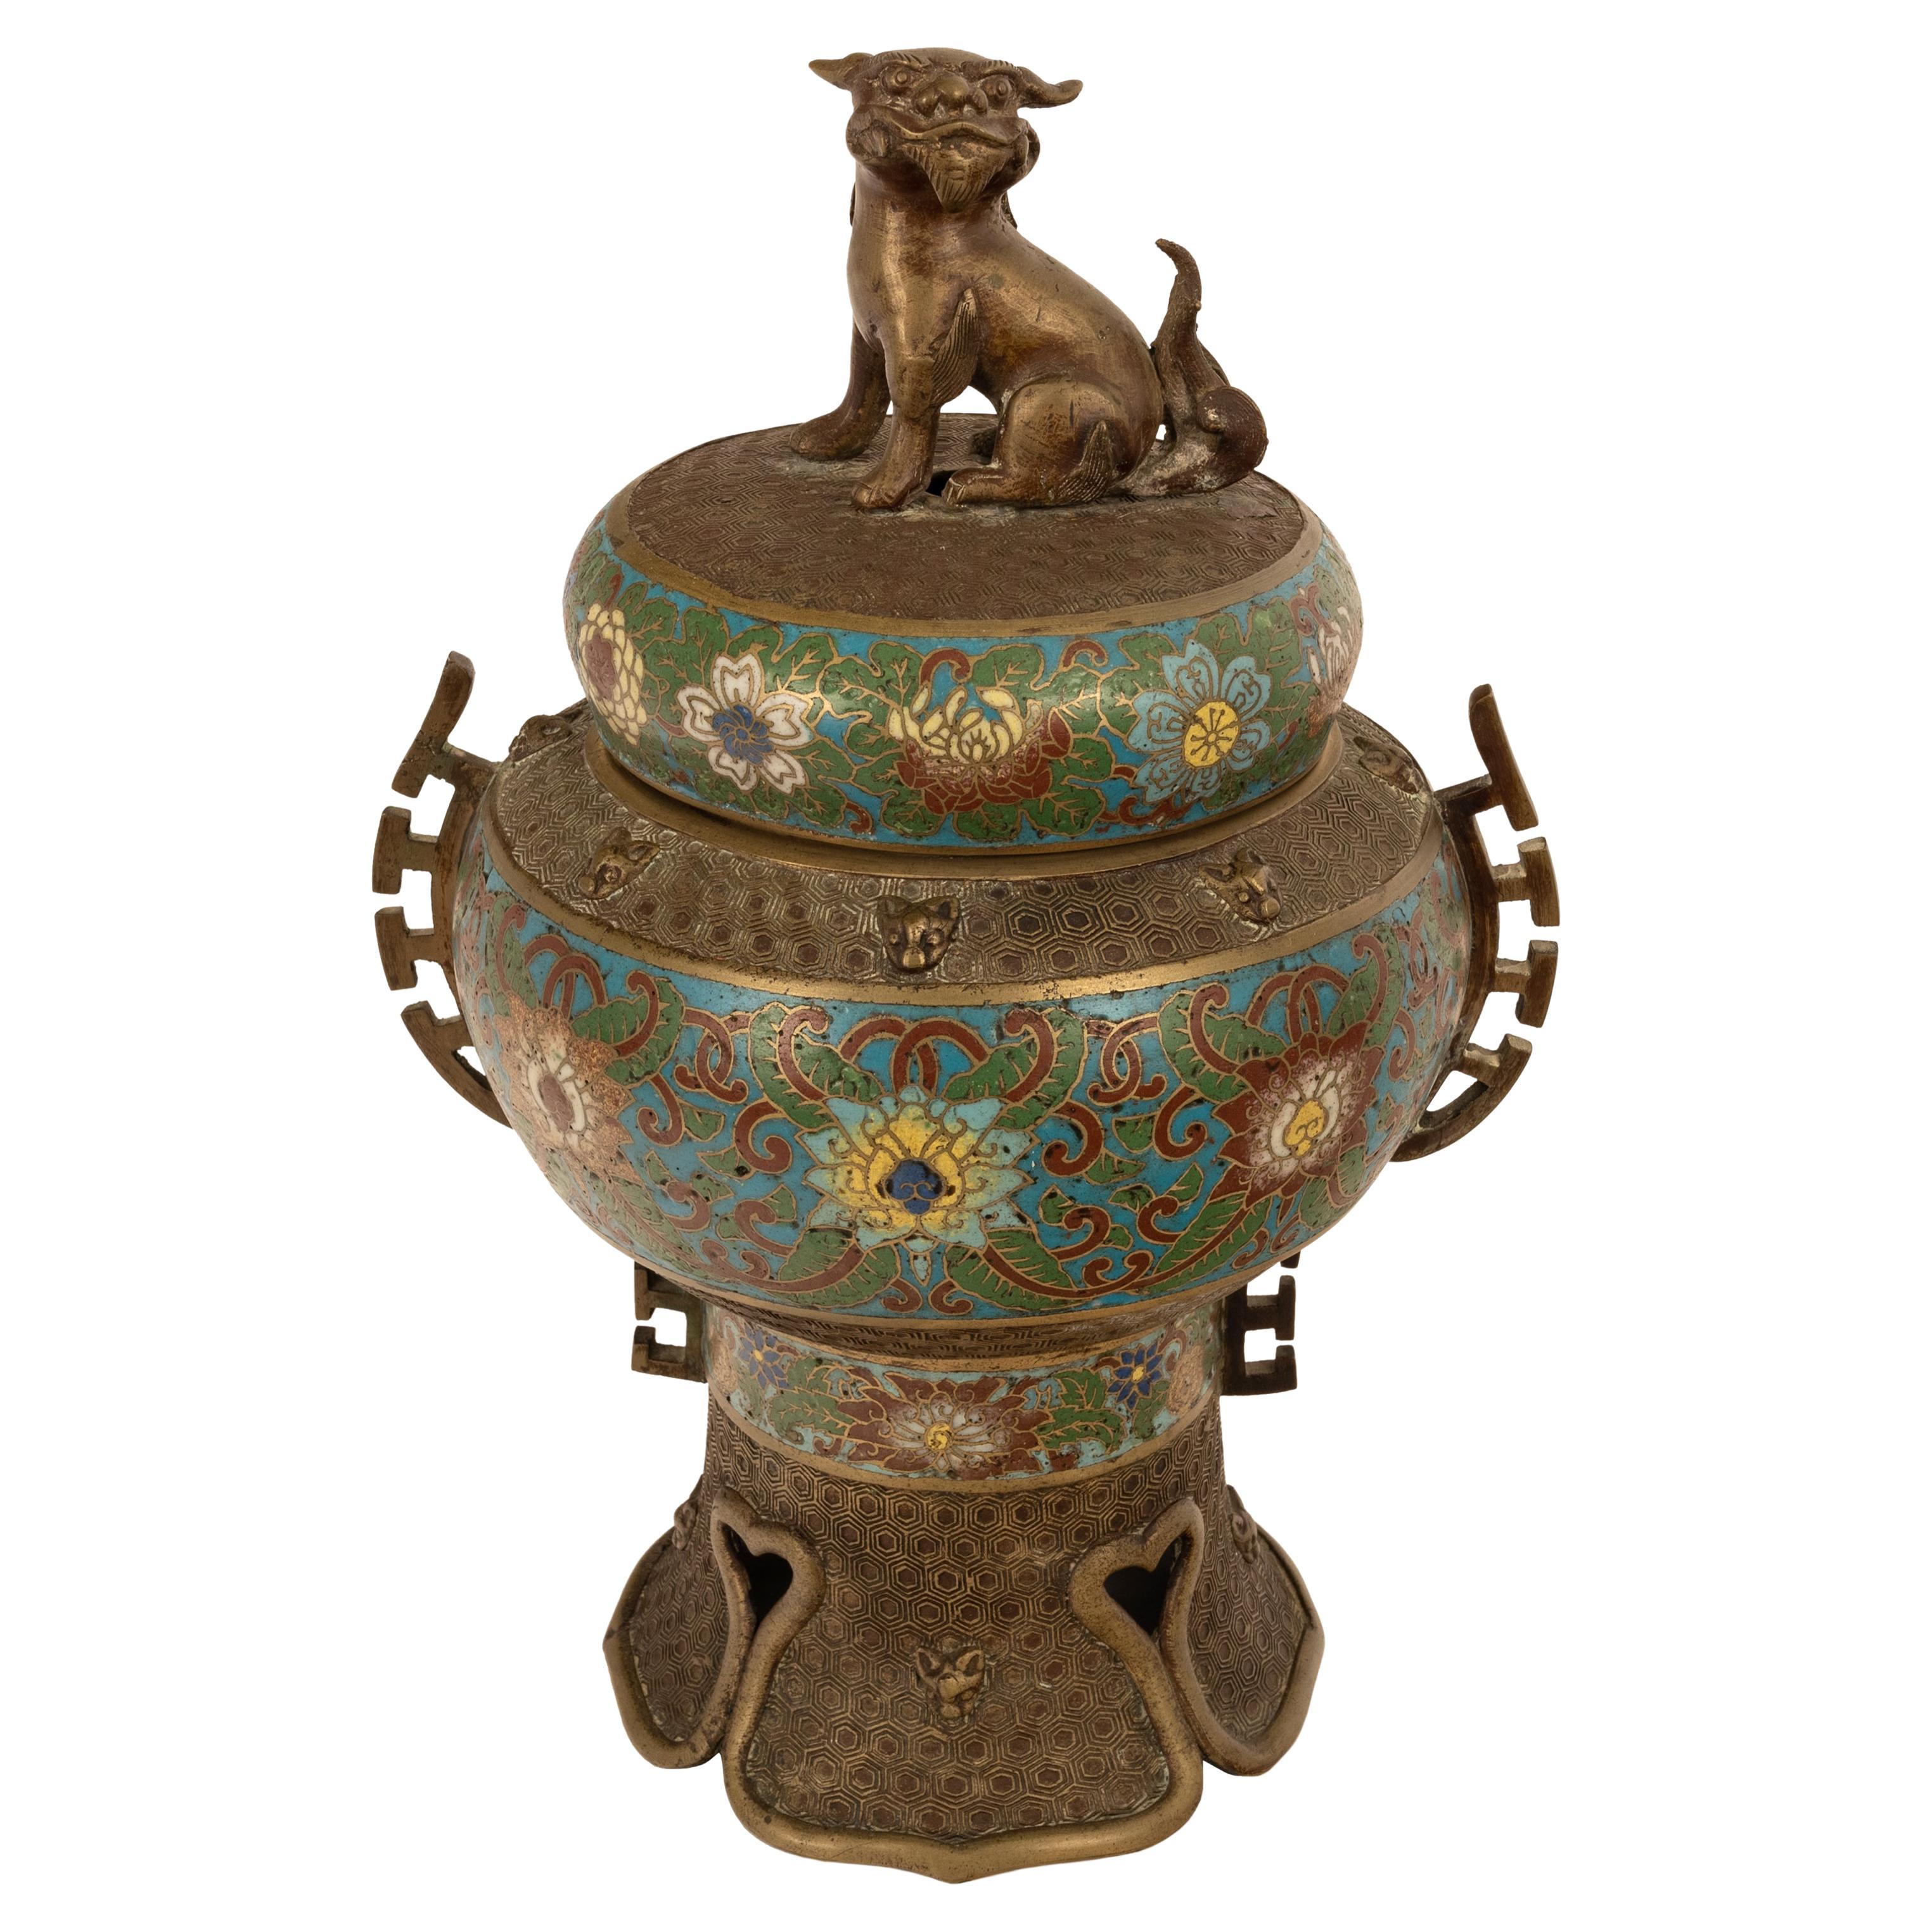 A good, large, antique Chinese Qing dynasty bronze and cloisonne censer, circa 1900.
The lidded censer having a Chinese lion (Shi) to the lid, the body and lid inlaid with floral cloisonne motifs, the sides having handles in an archaistic style,